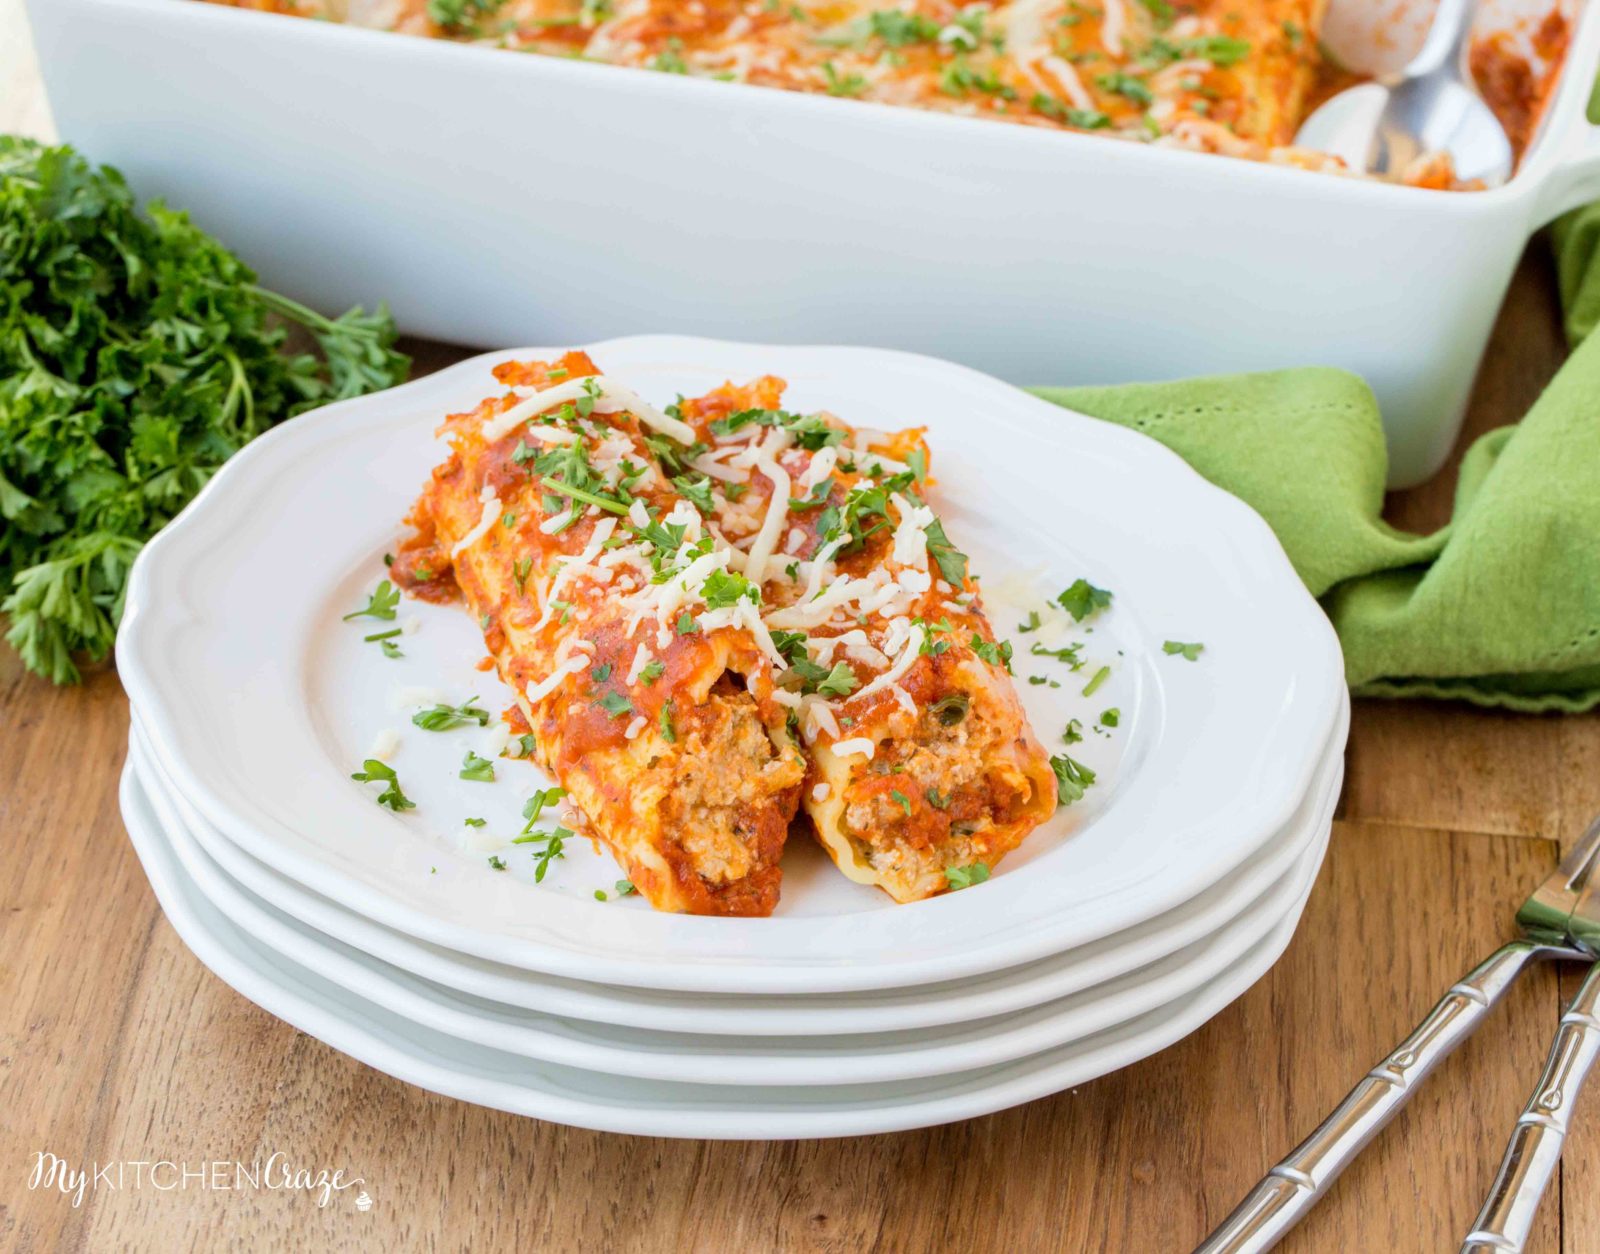 Homemade Manicotti ~ mykitchencraze.com ~ Enjoy this delicious homemade manicotti right at your own dinner table. It’s a perfect recipe for a potluck or family gathering.